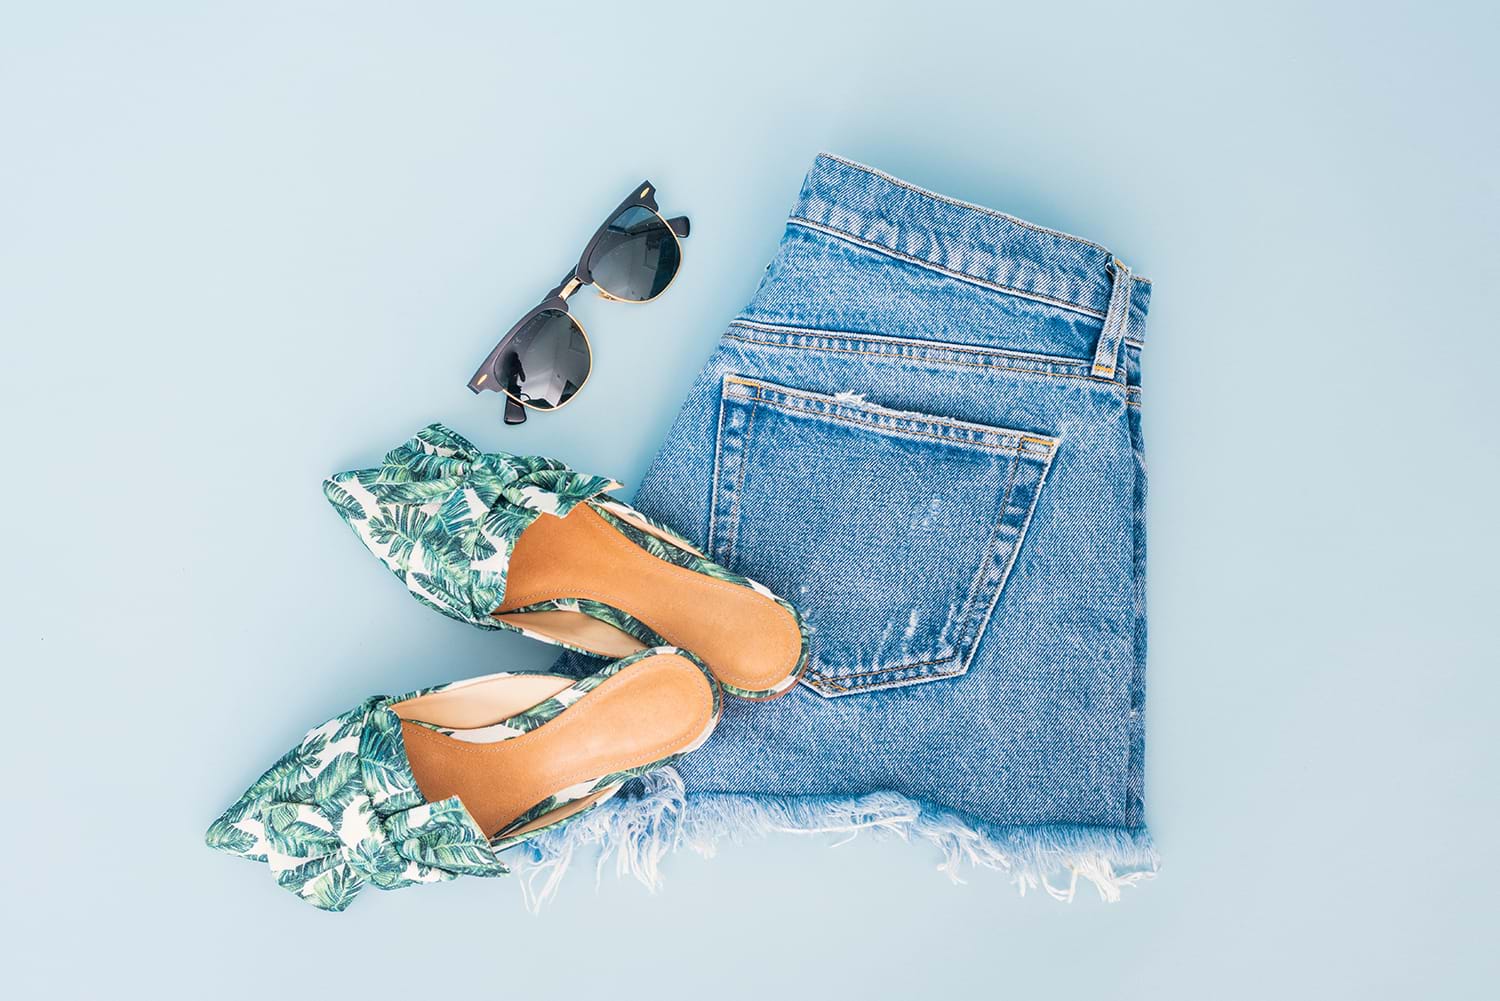 Jean shorts, shoes and sunglasses